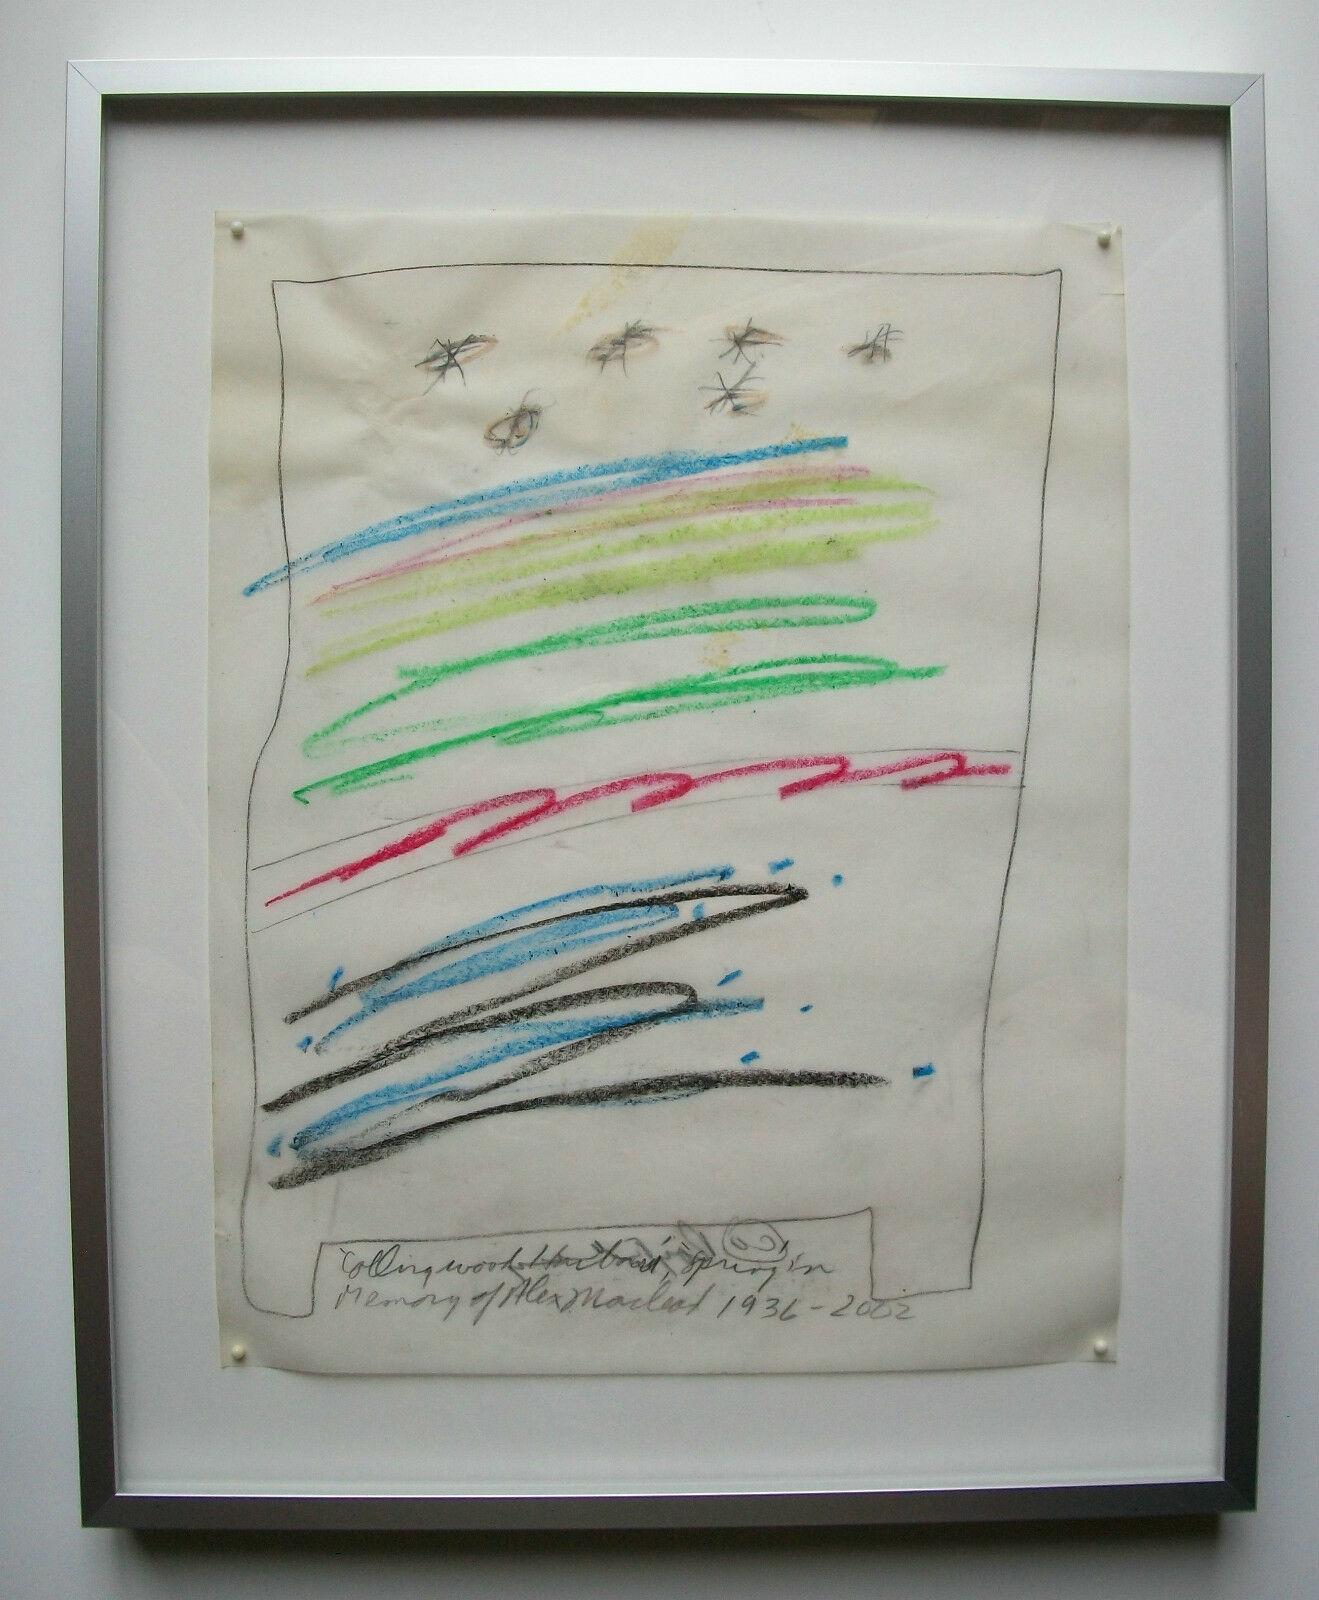 Hand-Painted Roy D. Fleming, Contemporary Canadian Graphite Drawing 1., Signed/Titled/Dated For Sale